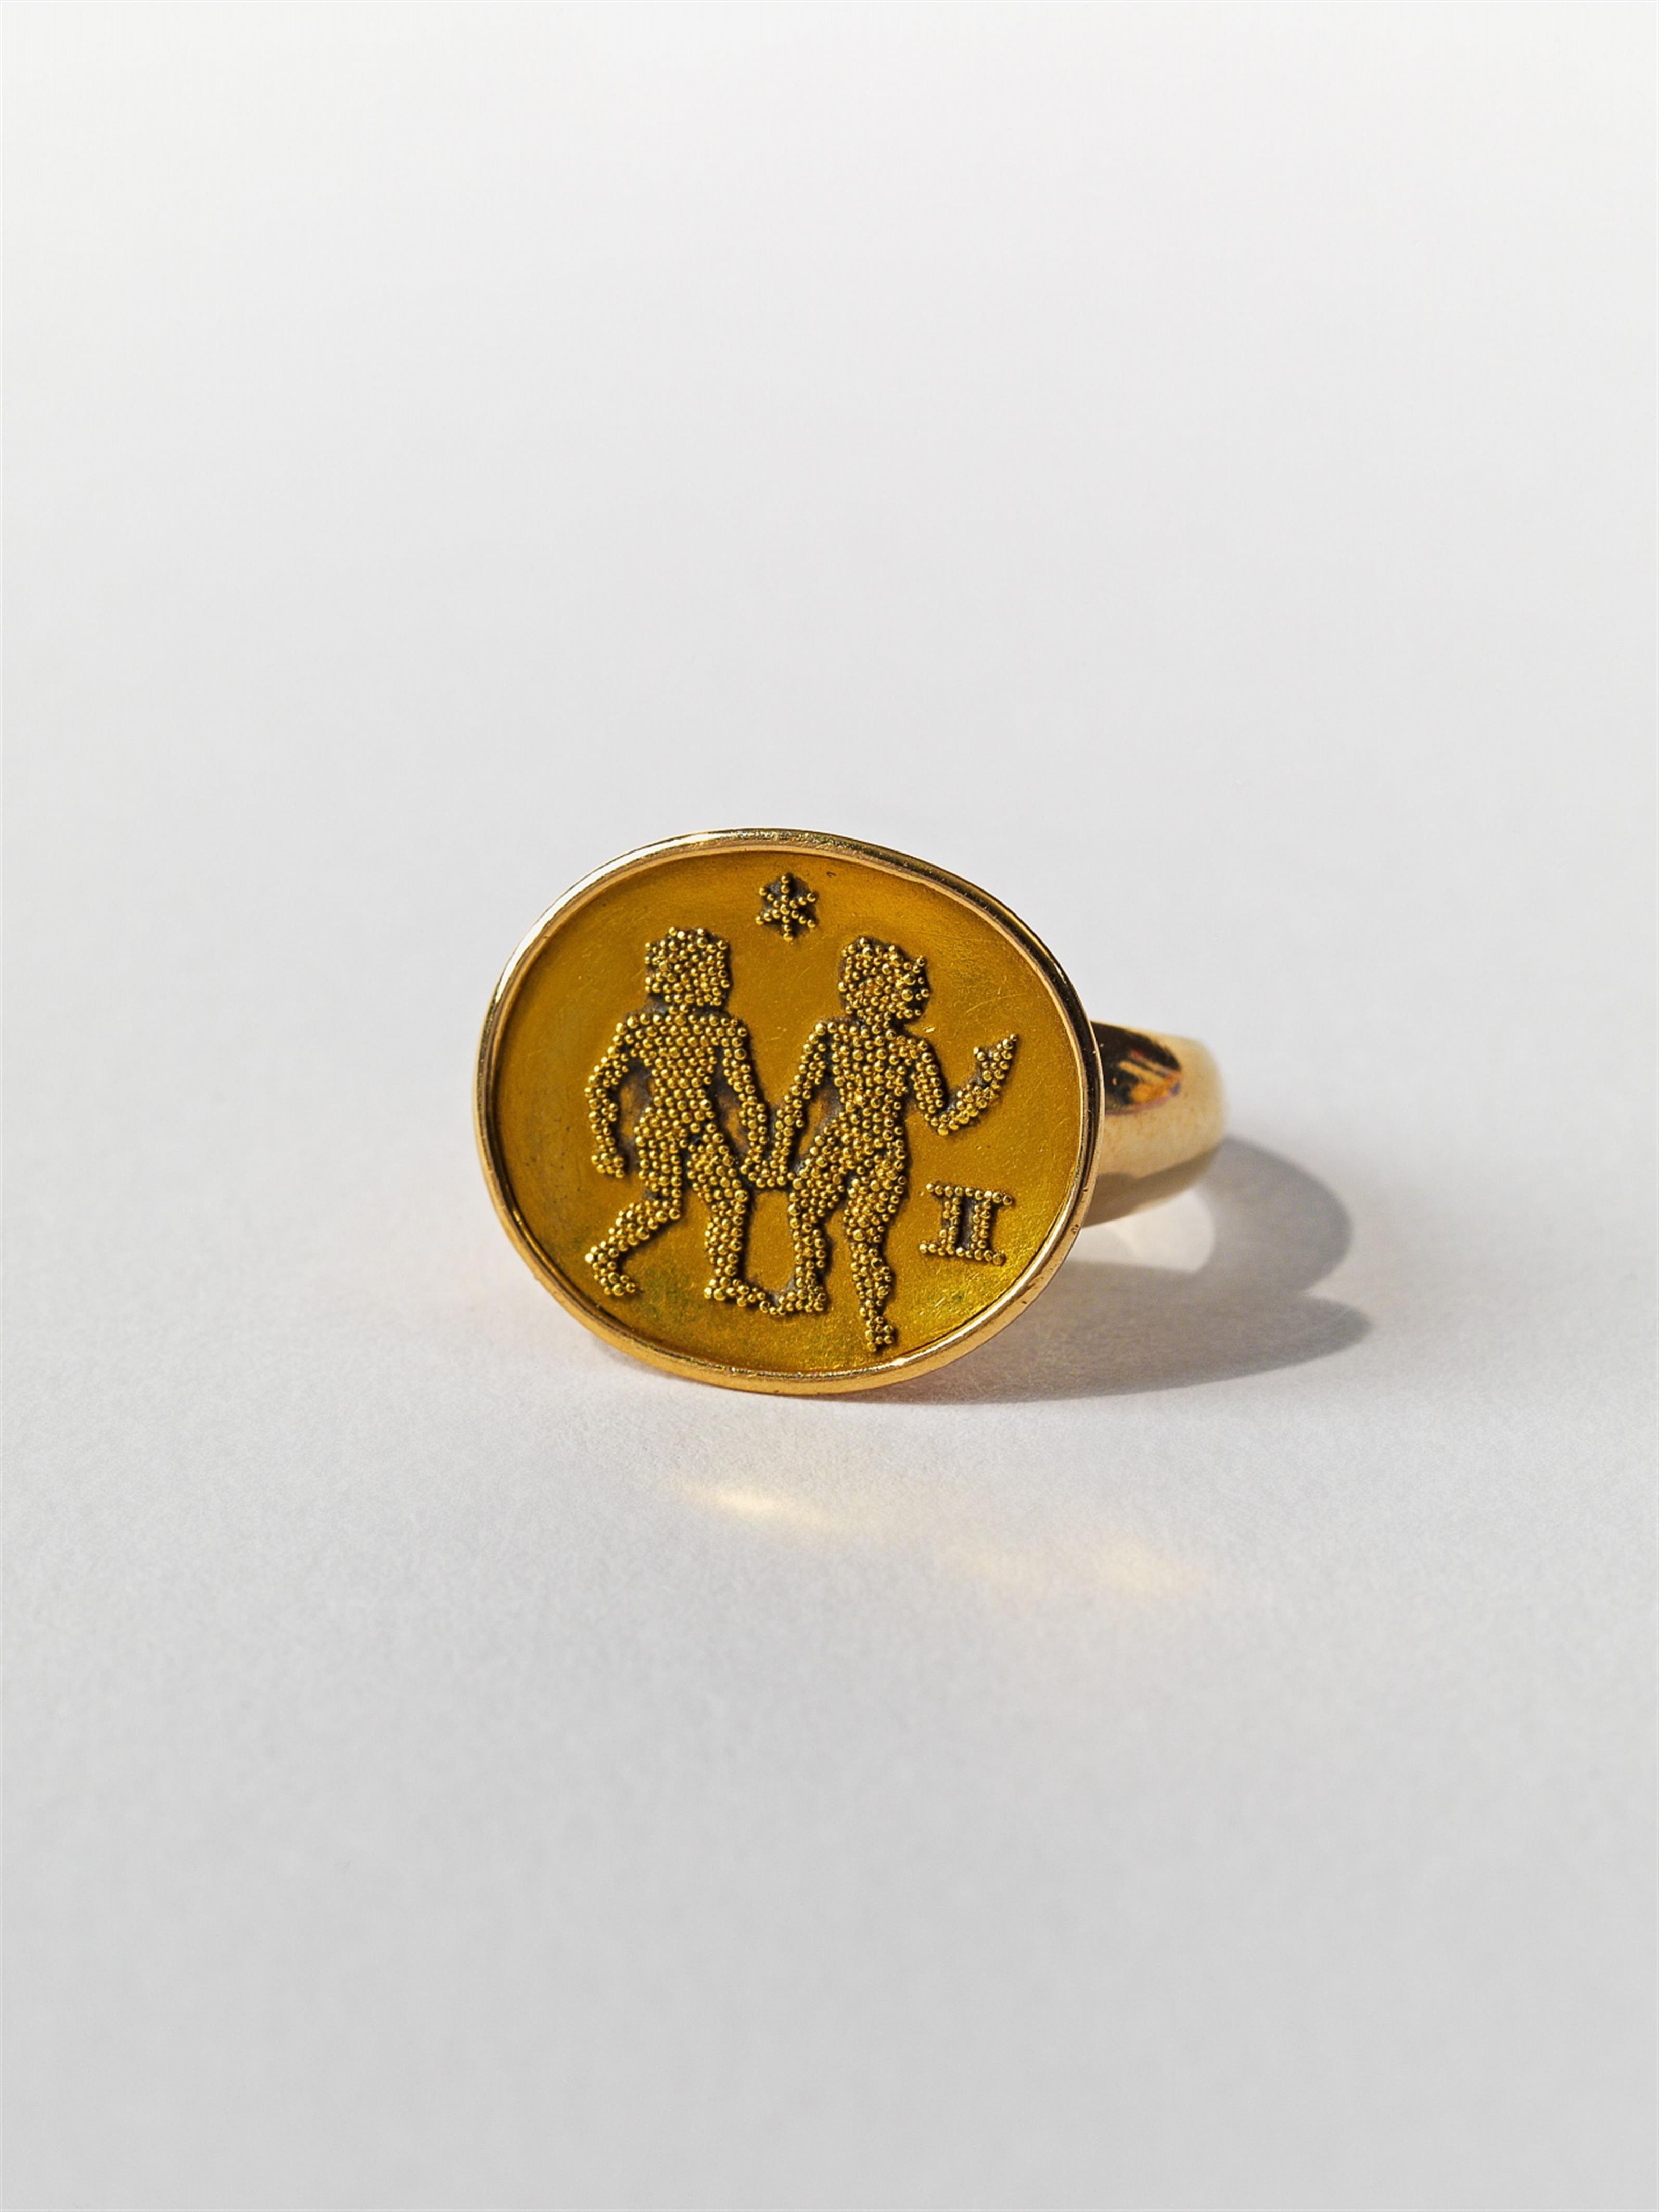 A 14k gold ring with granulated decor - image-1